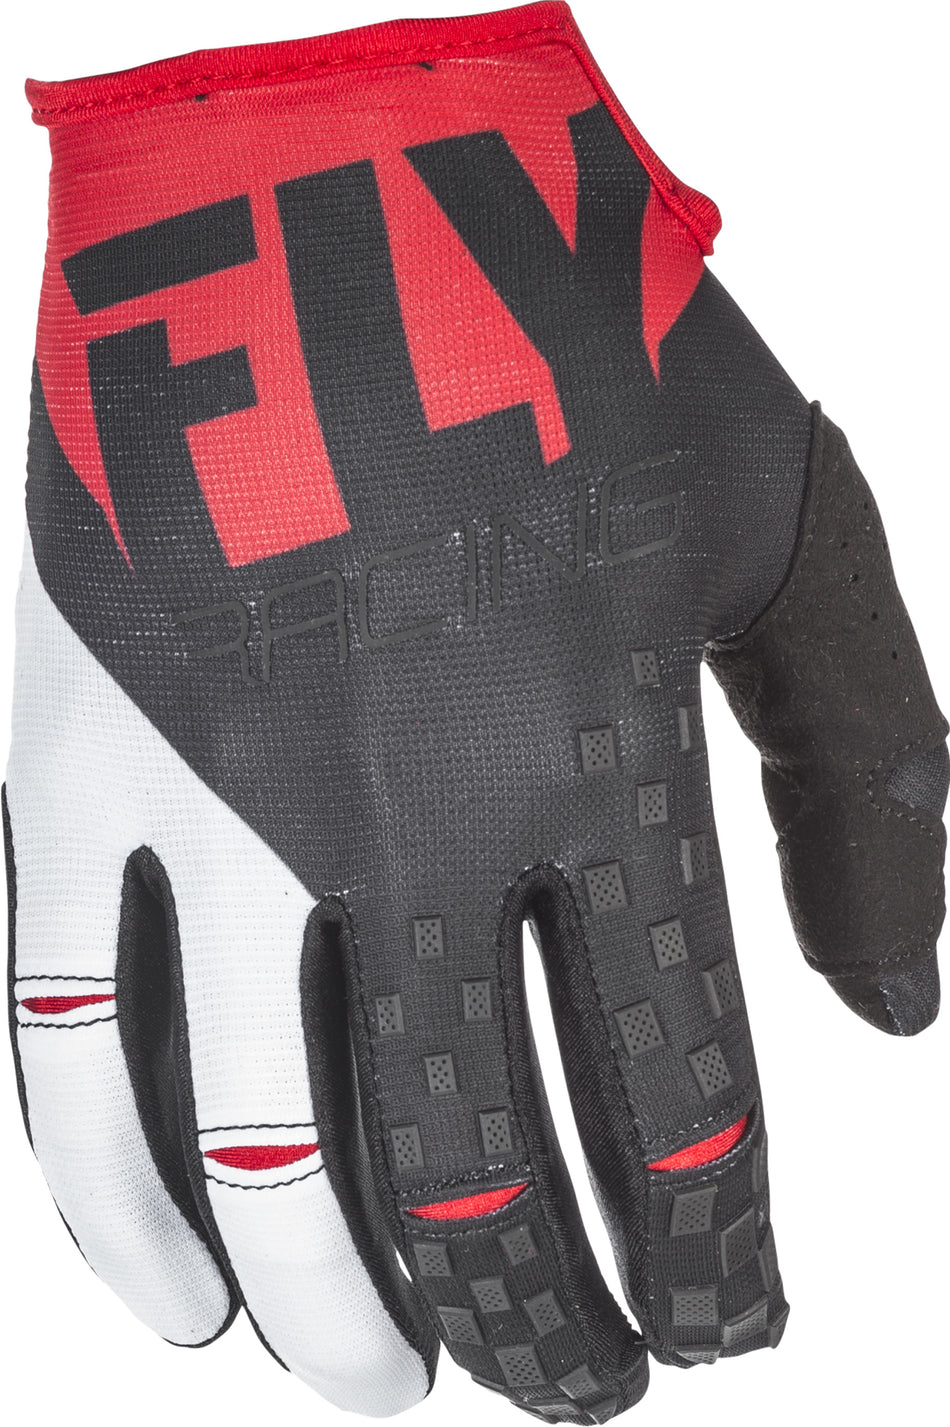 FLY RACING Kinetic Gloves Red/Black Sz 4 371-41204